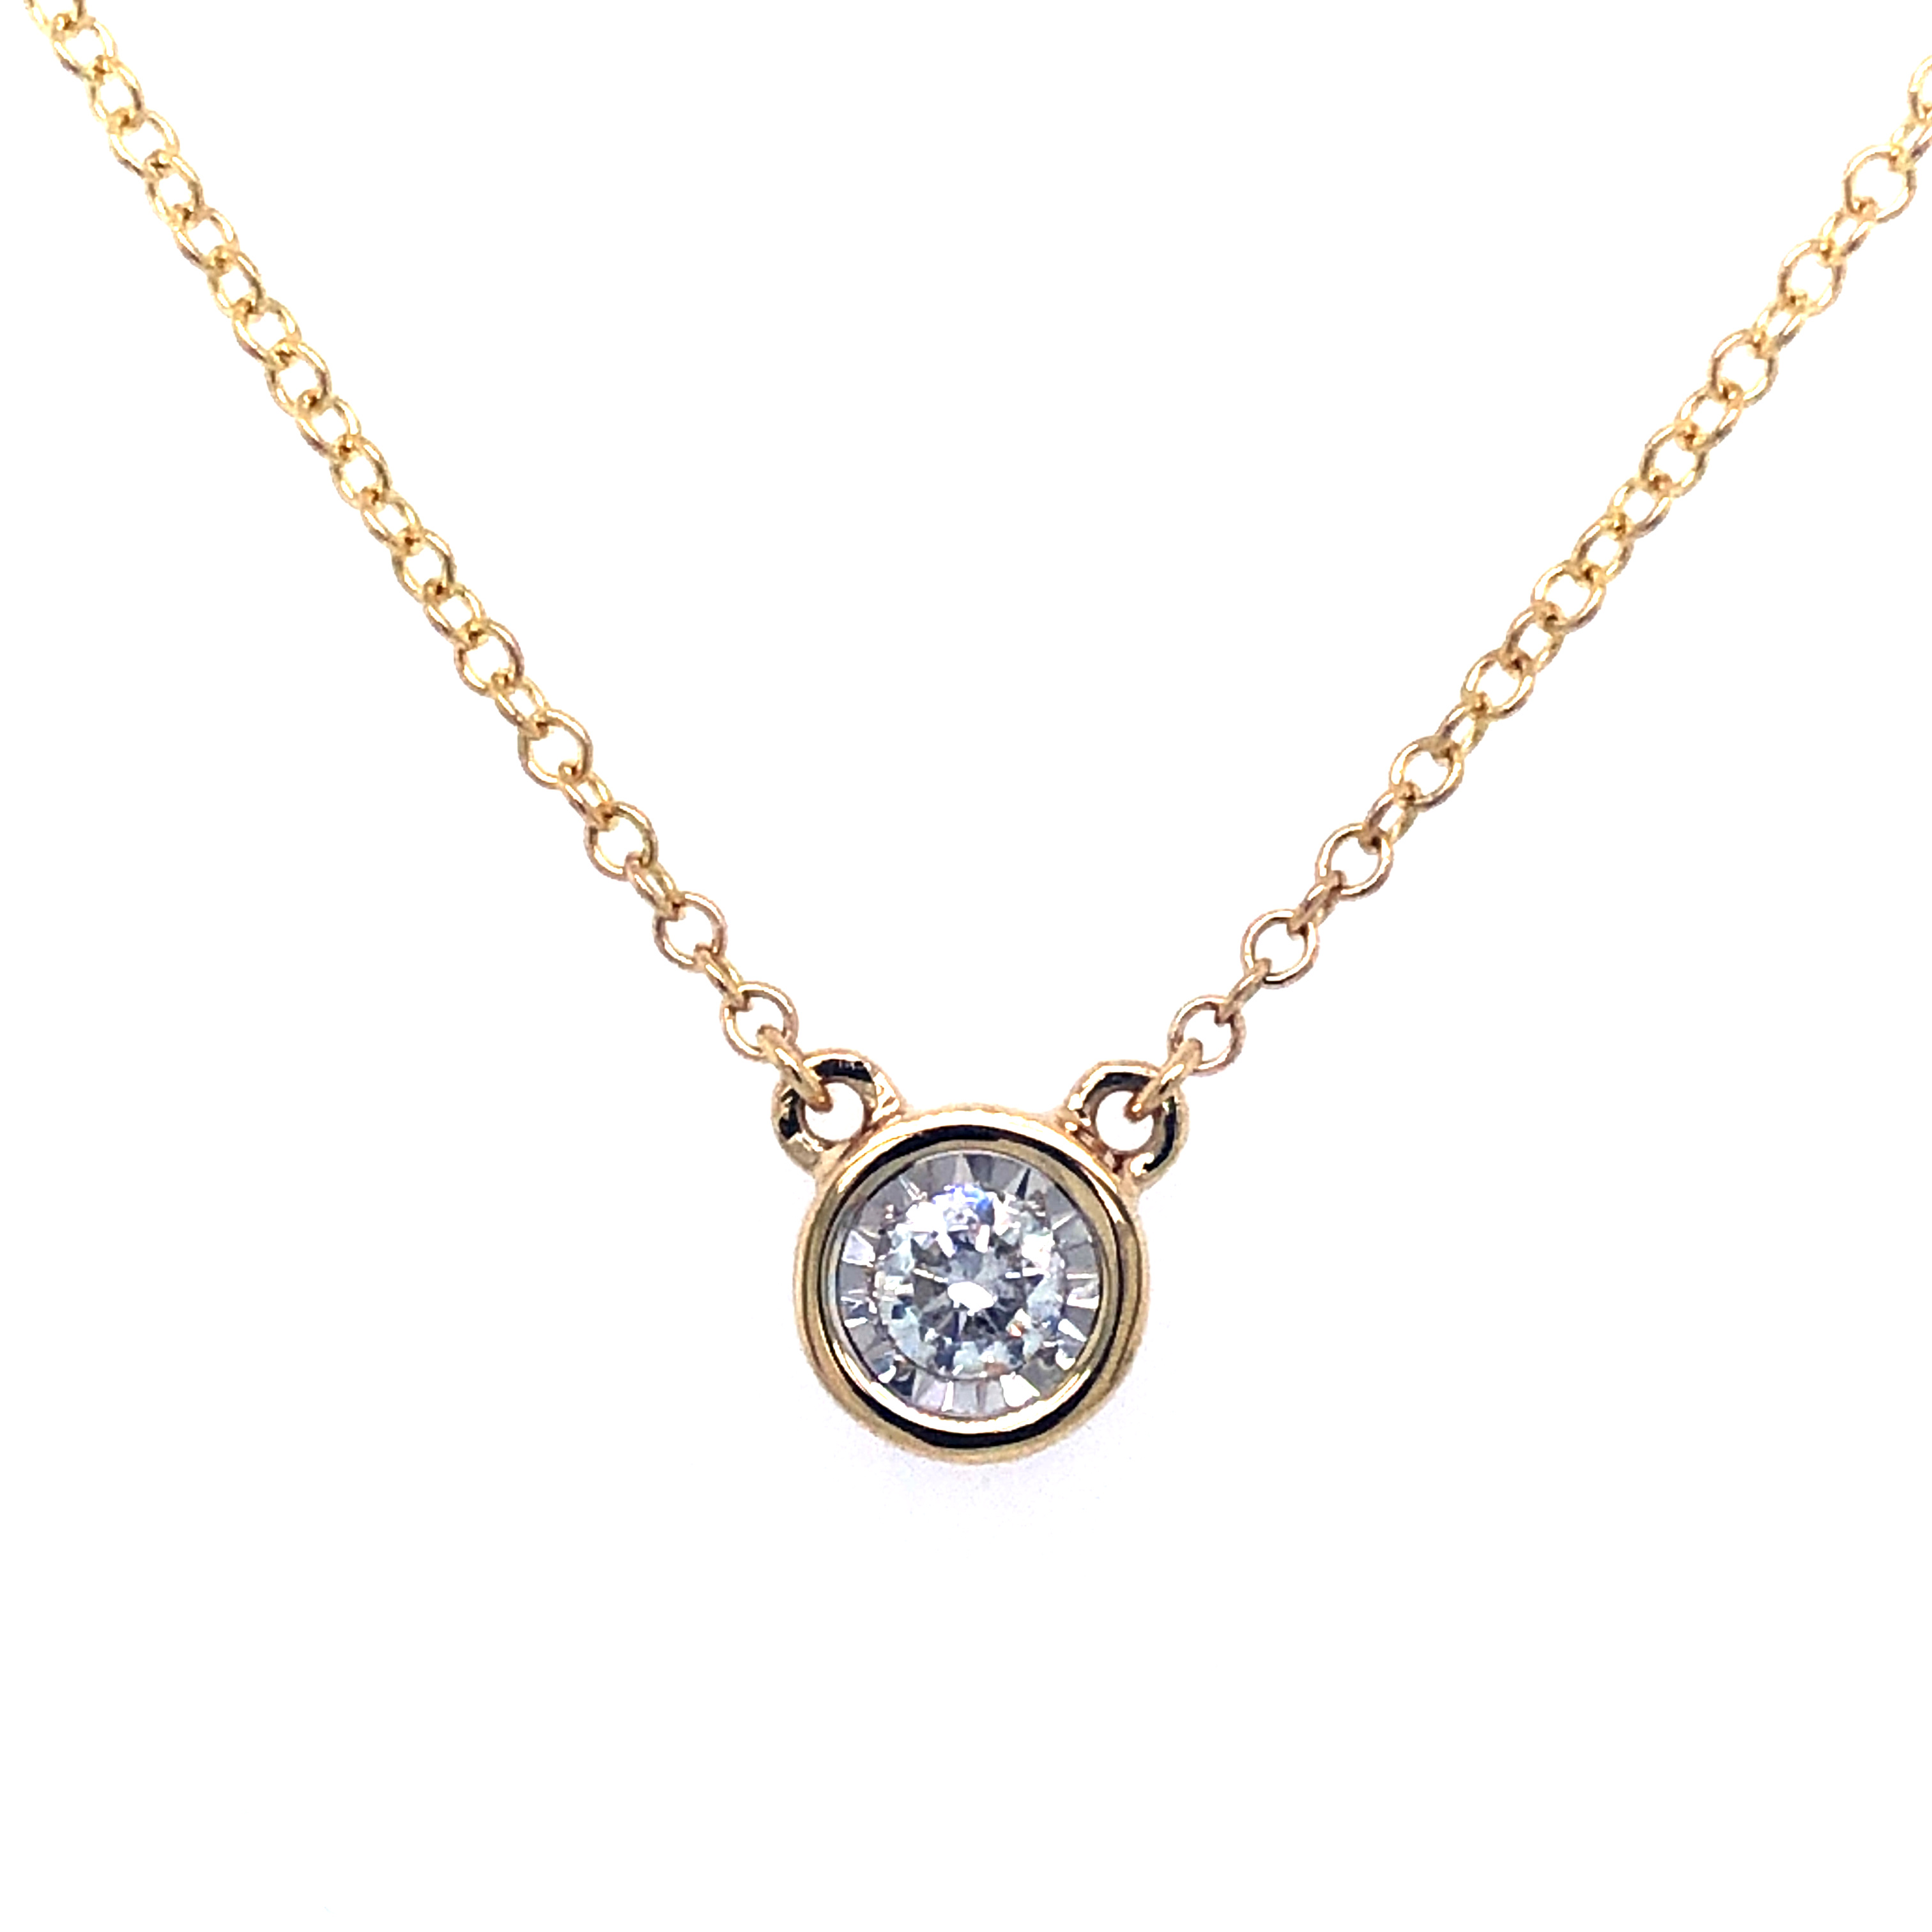 14 Karat yellow gold necklace Length 16 with One 0.15Ct Round Brilliant G I Diamond